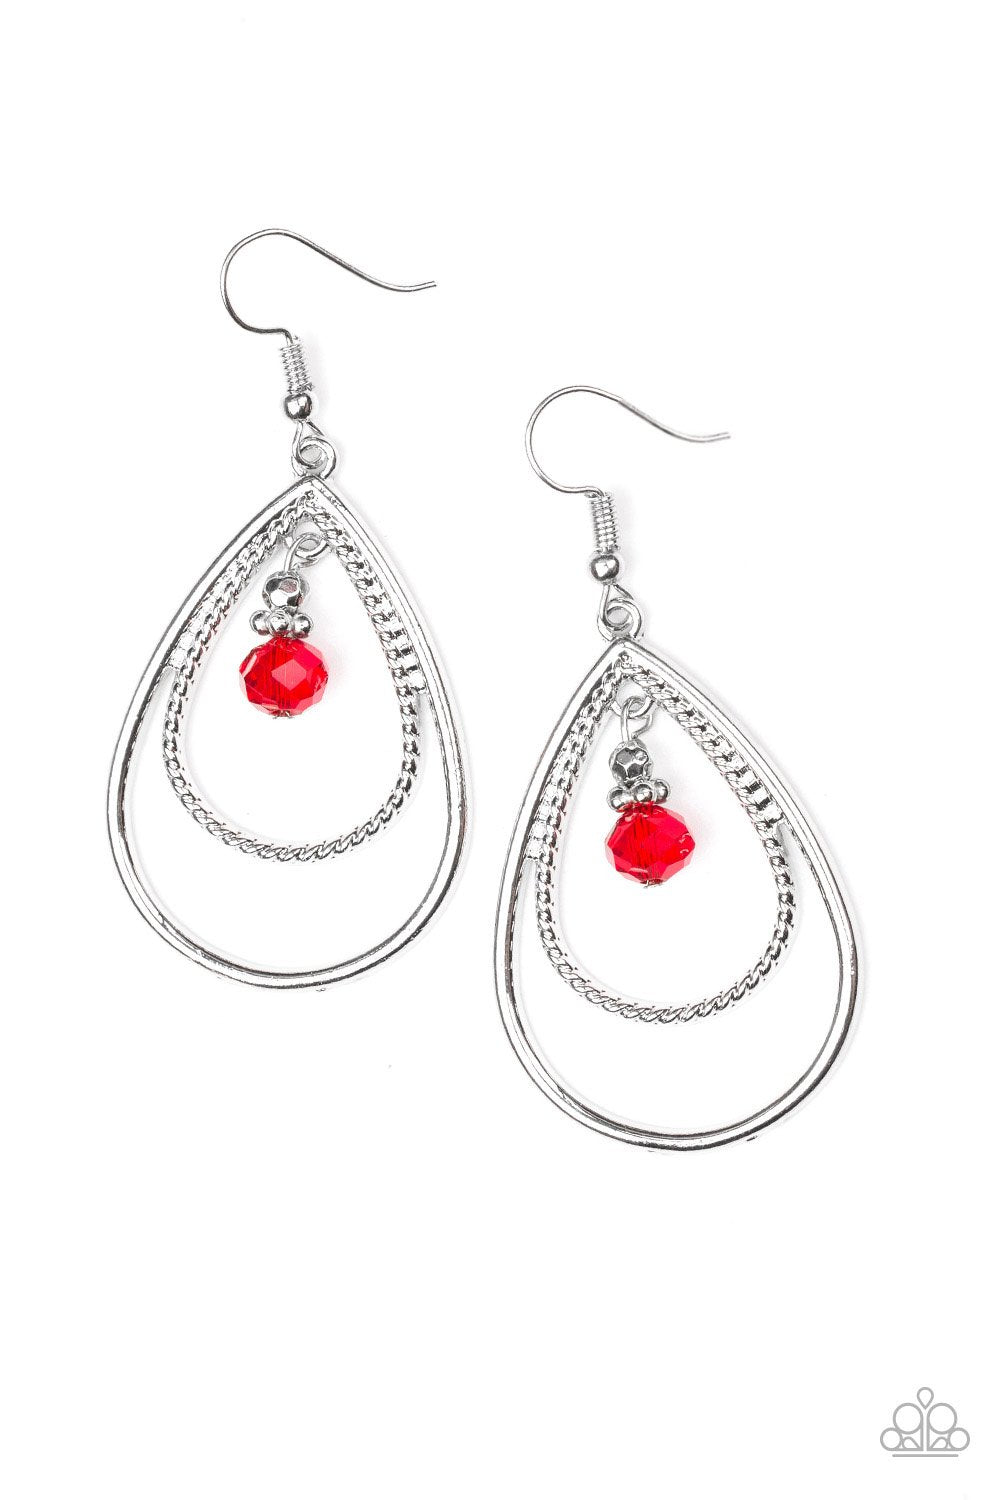 Paparazzi Reign On My Parade Red Fishhook Earrings